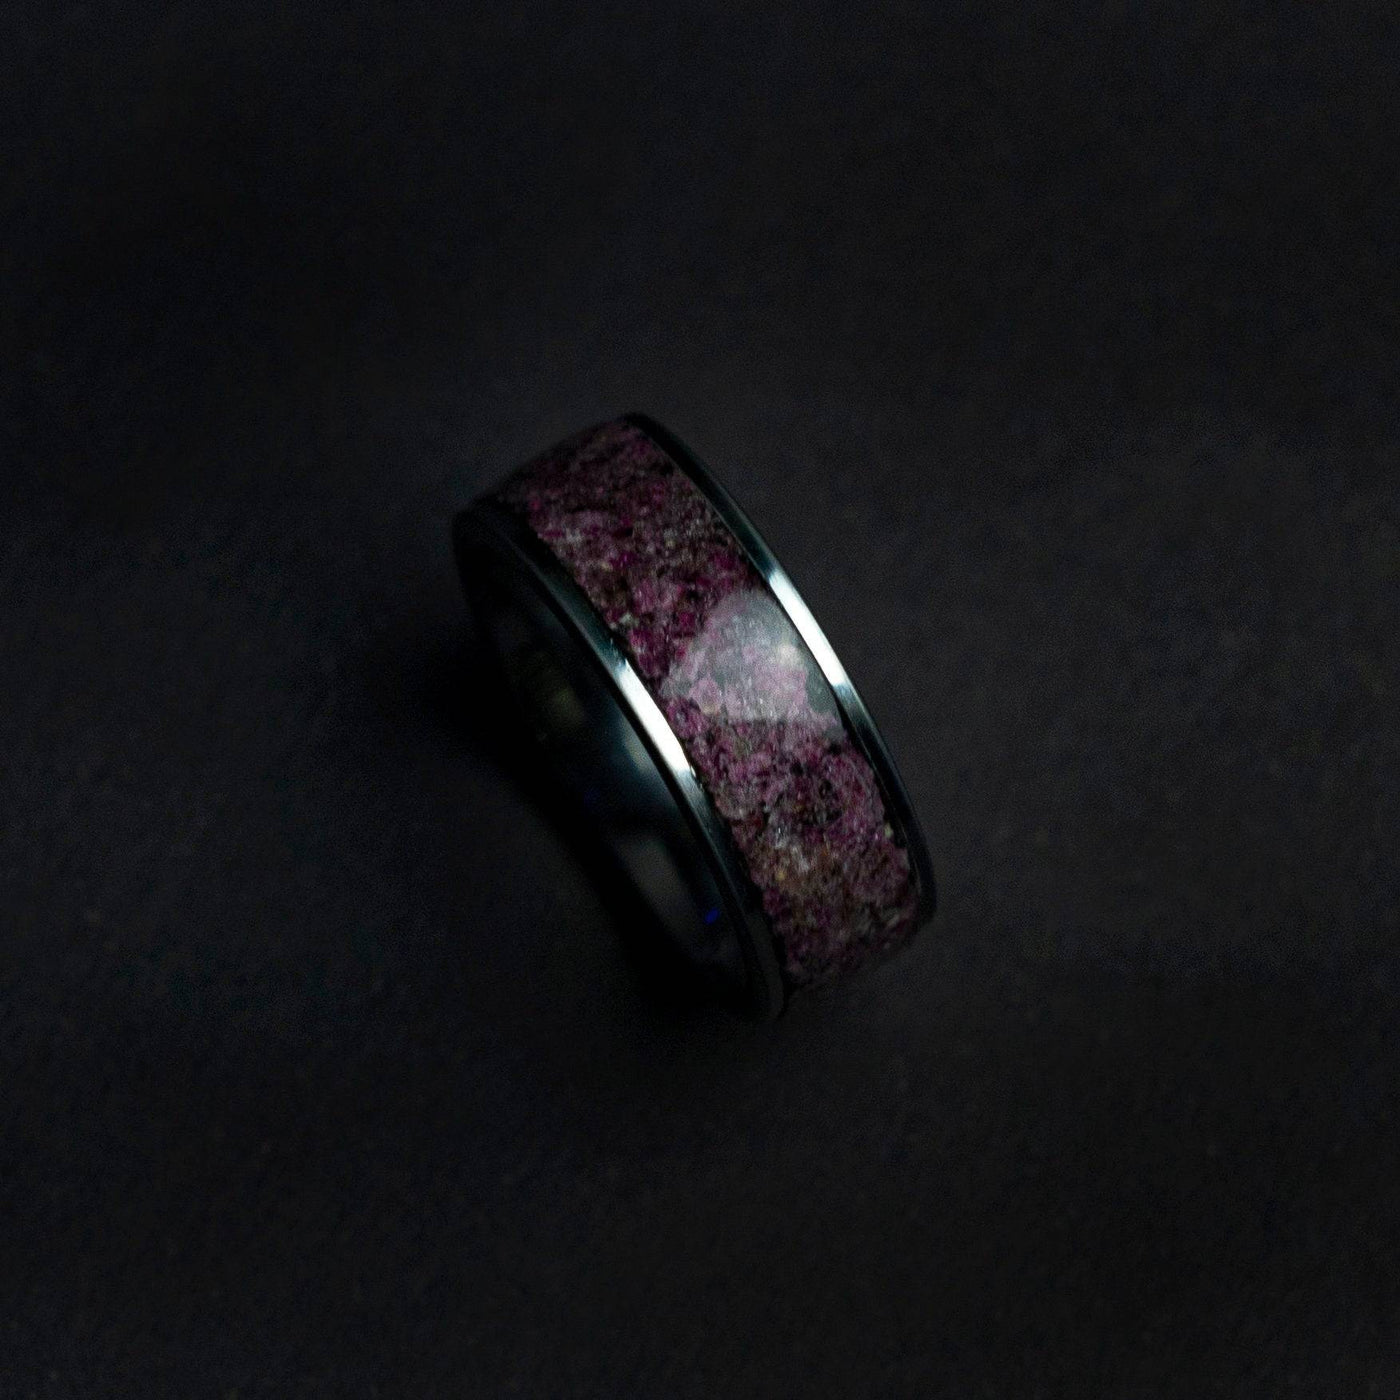 Tungsten ring filled with Ruby